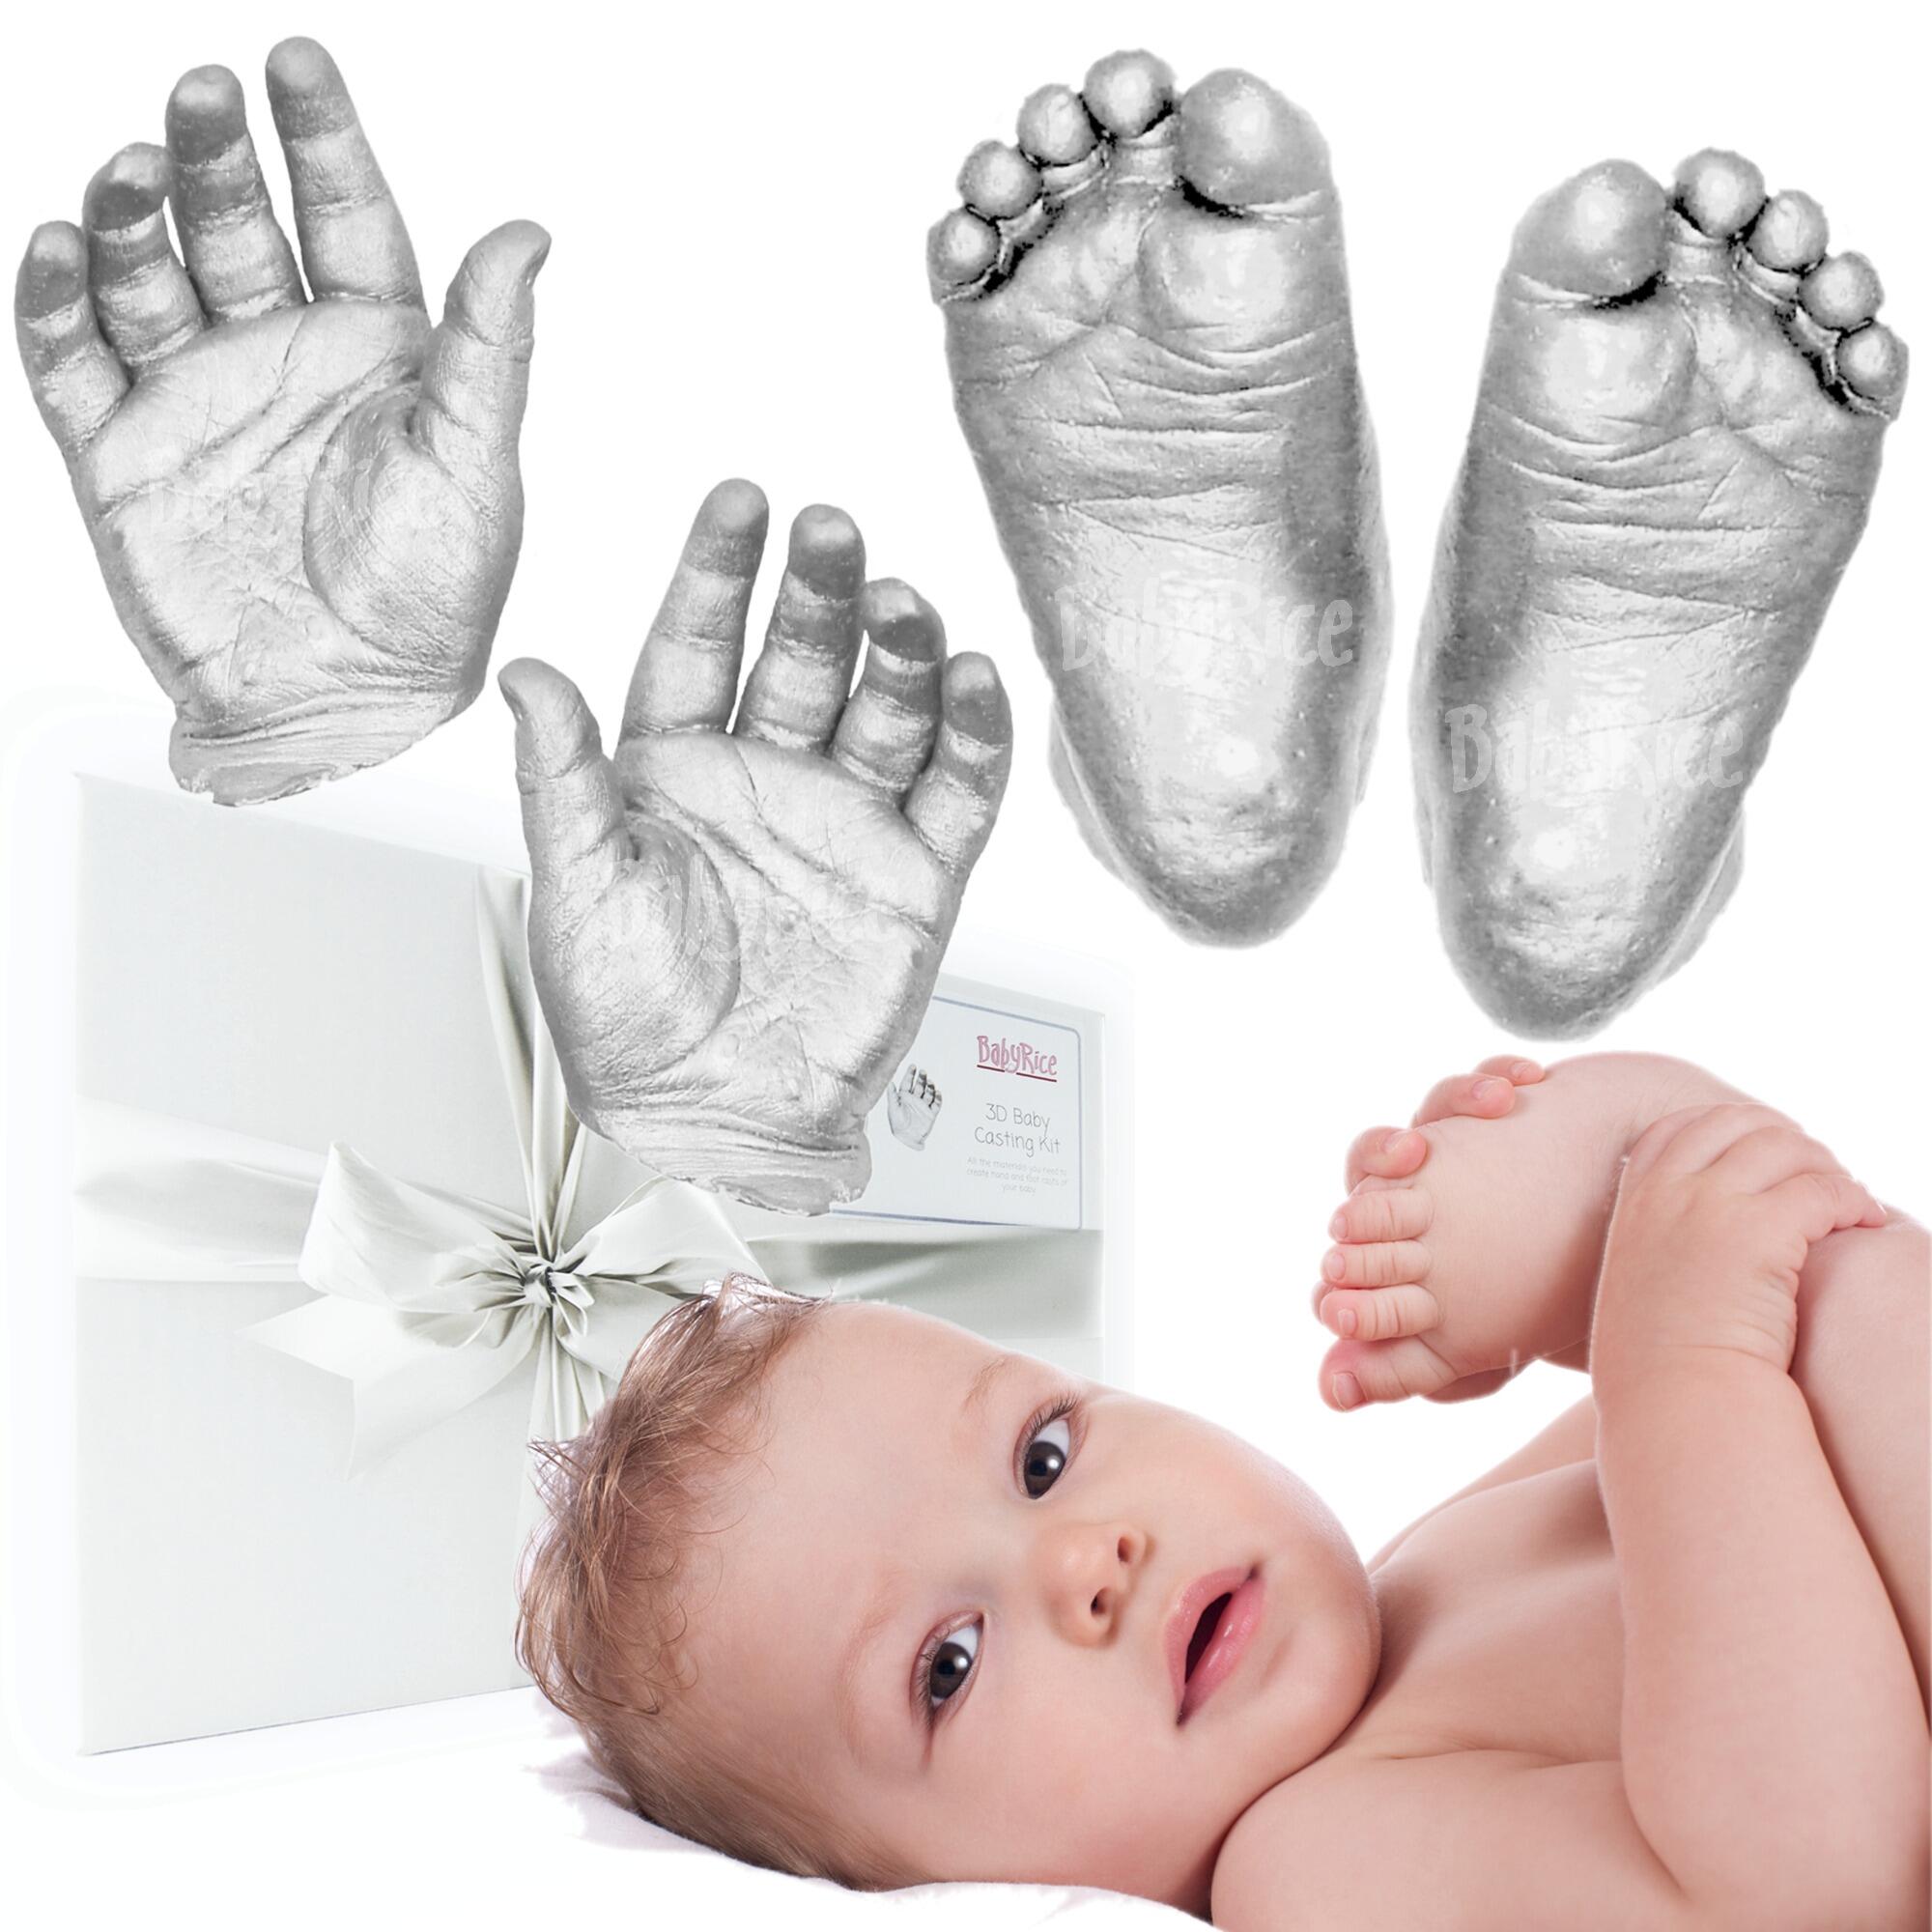 metallic silver baby hands and feet casting kit